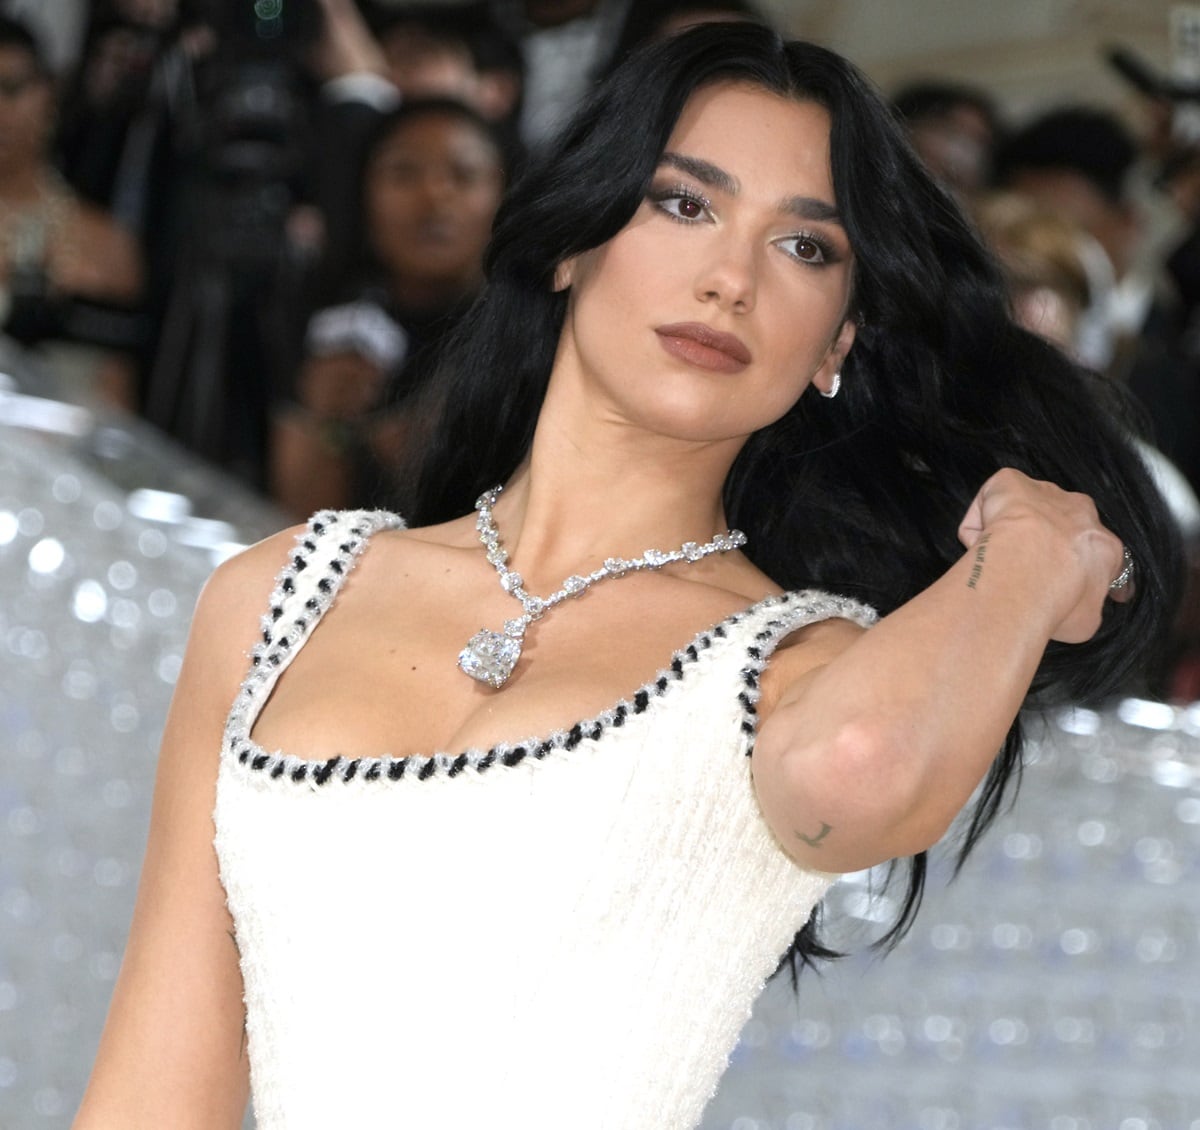 Dua Lipa styled her stunning Chanel gown with exquisite Tiffany & Co. jewelry that included a platinum necklace adorned with a primary diamond weighing over 200 carats, cut in the iconic proportions of the famous Tiffany Diamond